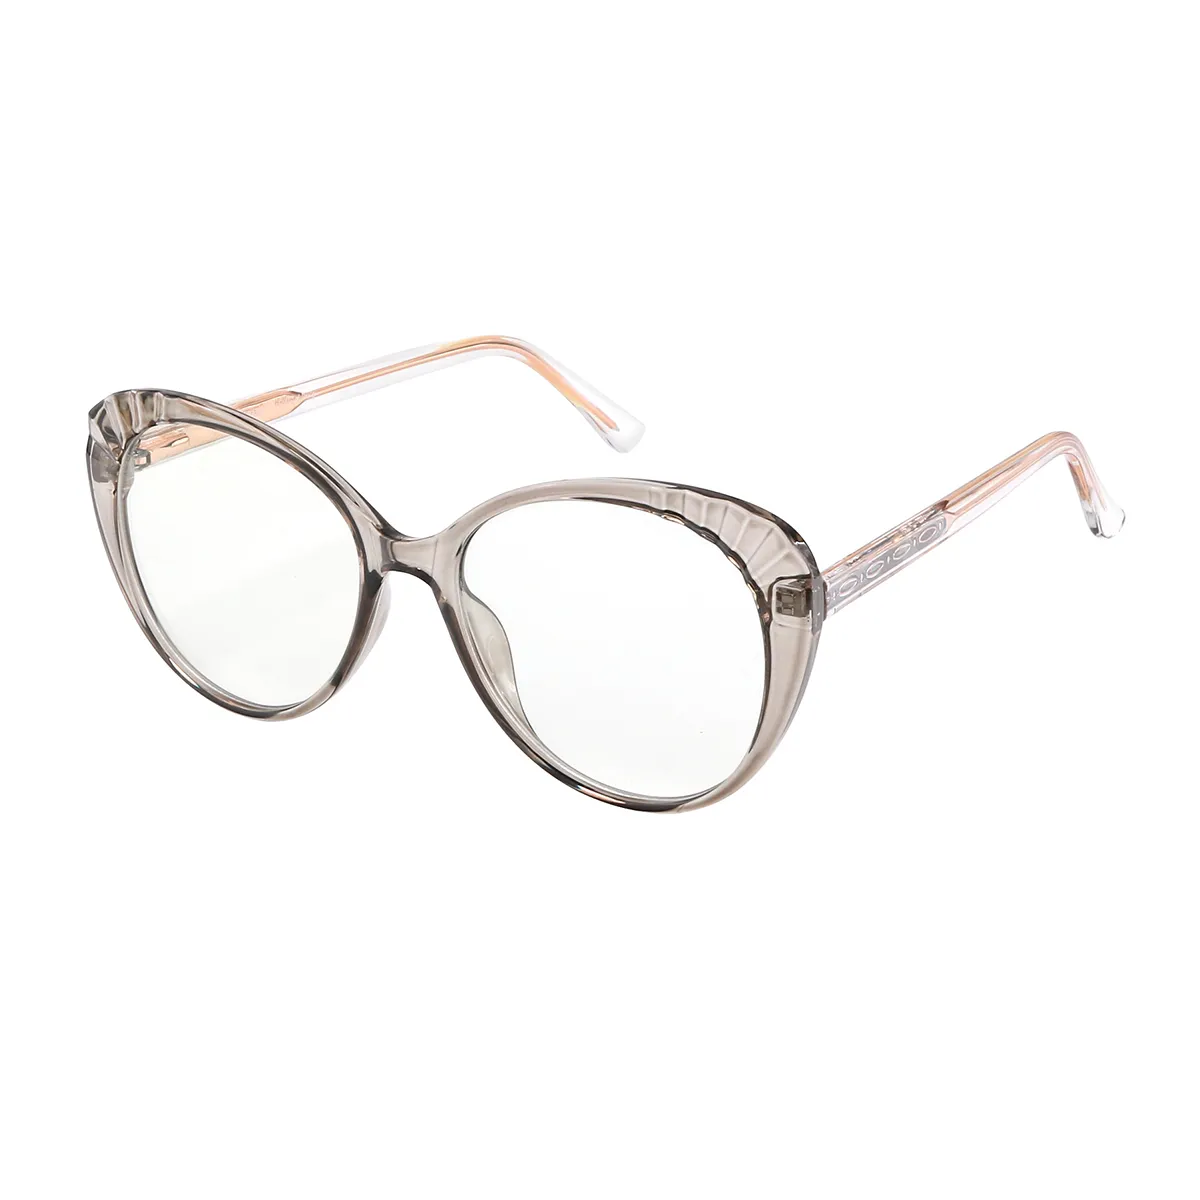 Fashion Oval Translucent Glasses for Women